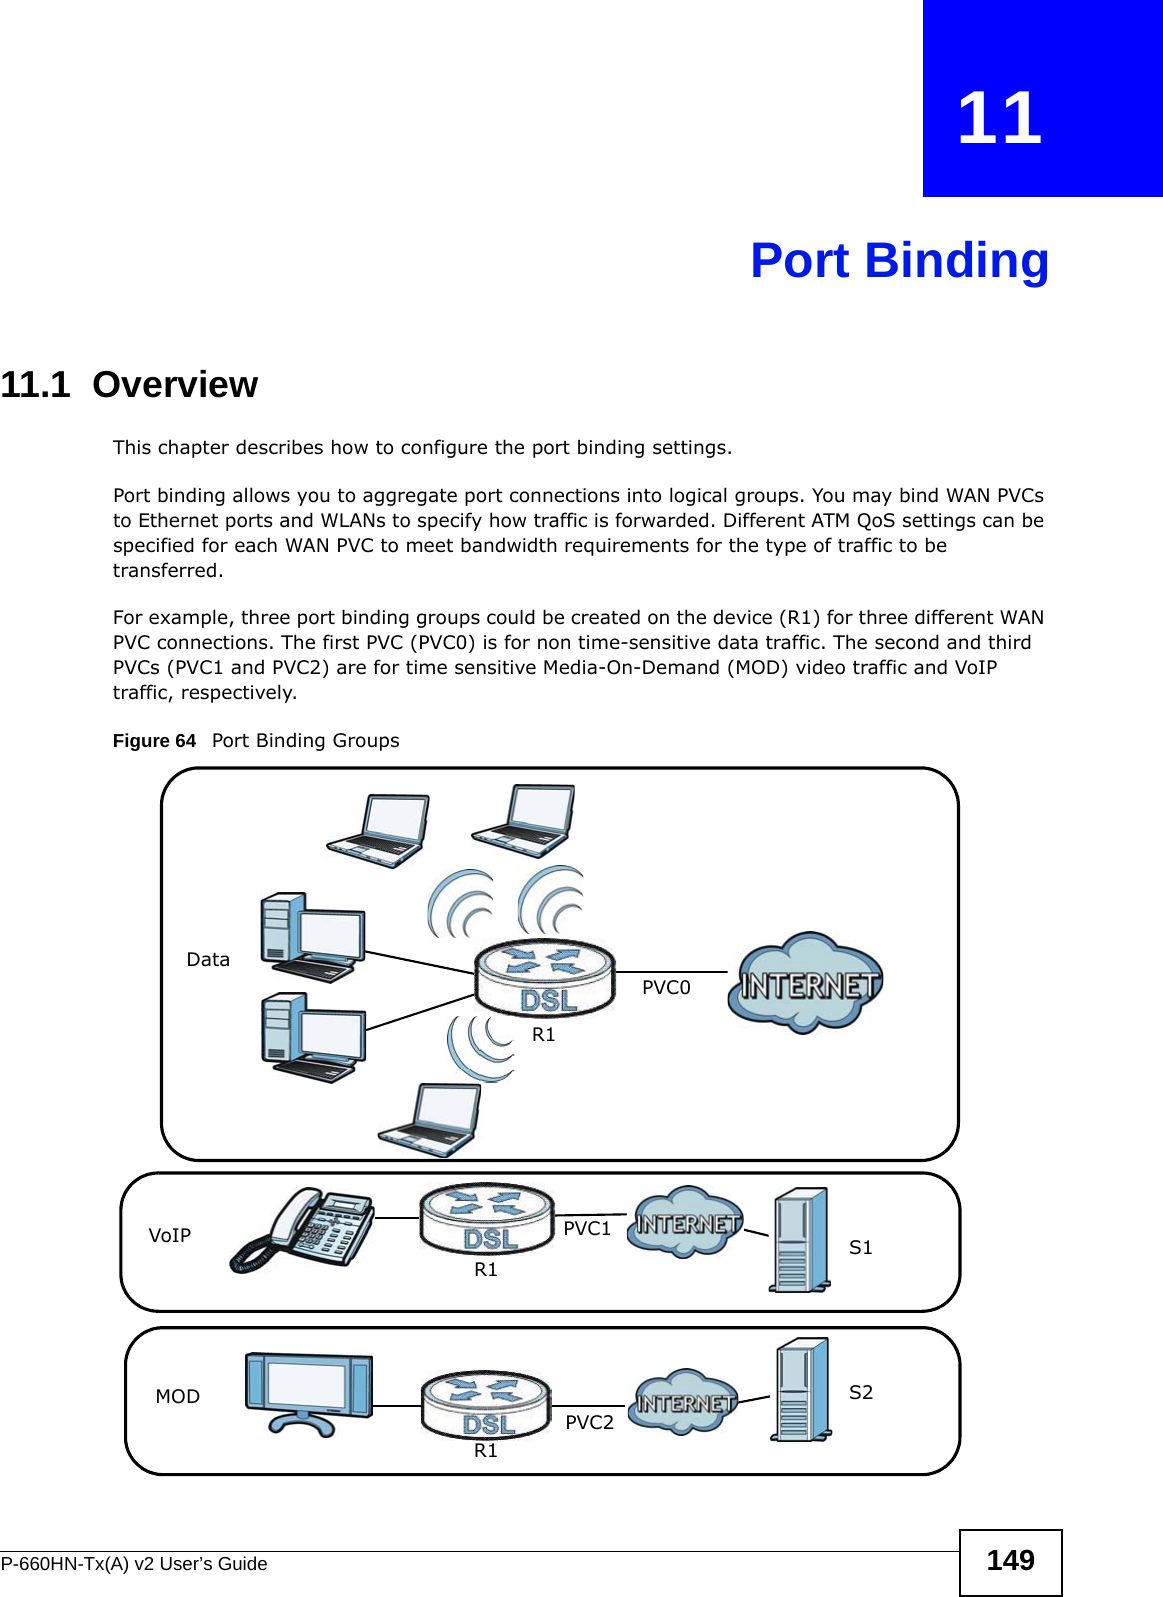 P-660HN-Tx(A) v2 User’s Guide 149CHAPTER   11Port Binding11.1  OverviewThis chapter describes how to configure the port binding settings.Port binding allows you to aggregate port connections into logical groups. You may bind WAN PVCs to Ethernet ports and WLANs to specify how traffic is forwarded. Different ATM QoS settings can be specified for each WAN PVC to meet bandwidth requirements for the type of traffic to be transferred.For example, three port binding groups could be created on the device (R1) for three different WAN PVC connections. The first PVC (PVC0) is for non time-sensitive data traffic. The second and third PVCs (PVC1 and PVC2) are for time sensitive Media-On-Demand (MOD) video traffic and VoIP traffic, respectively.   Figure 64   Port Binding GroupsS2S1R1R1R1MODVoIPDataPVC0PVC2PVC1